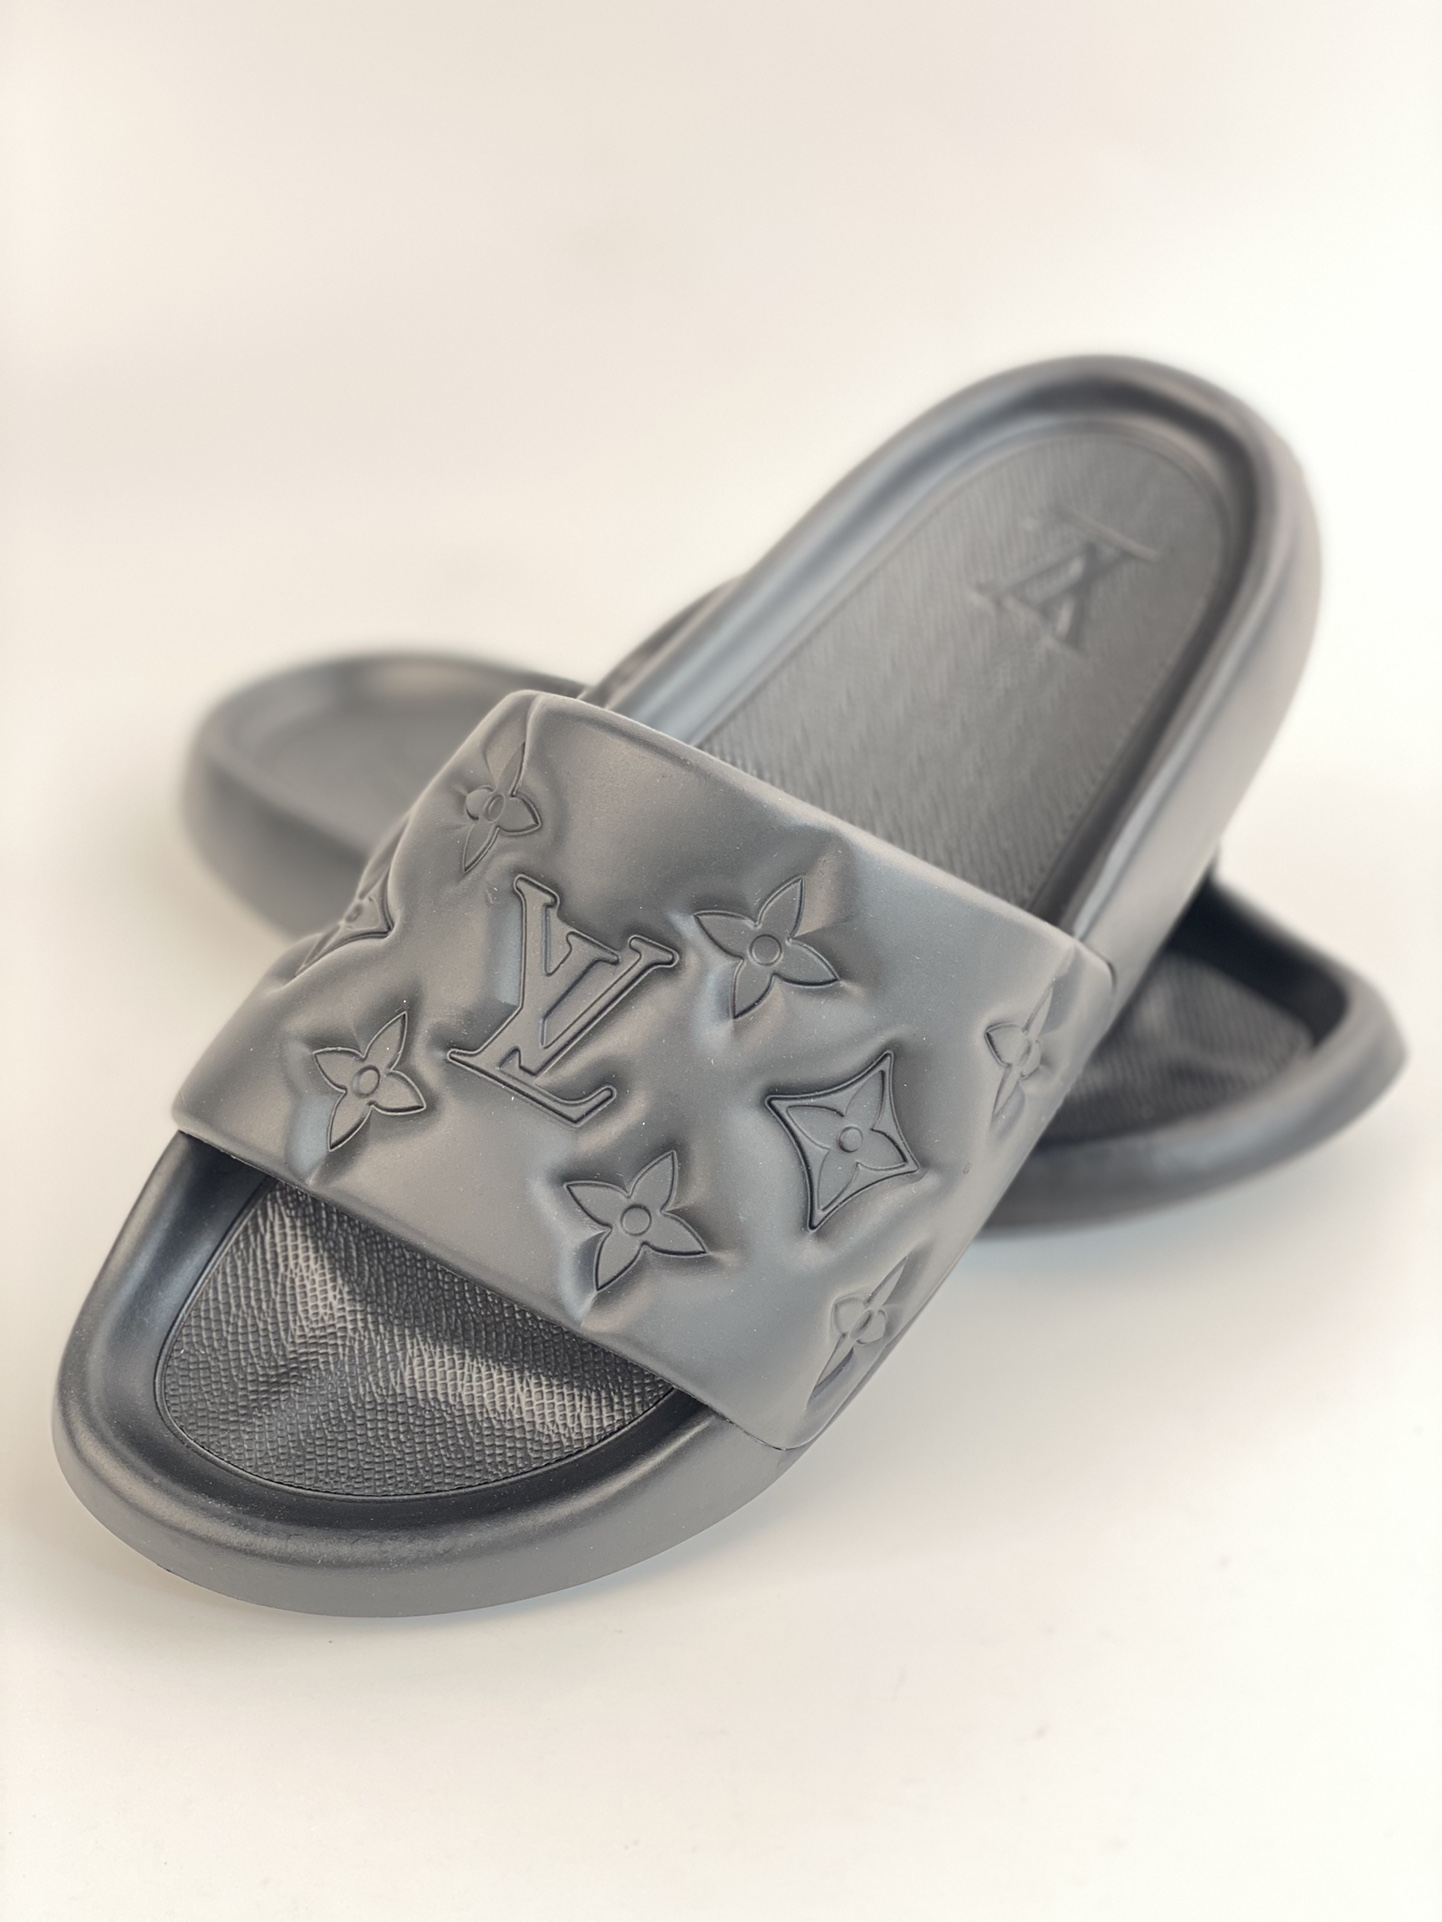 Louis Vuitton LV summer new casual slippers